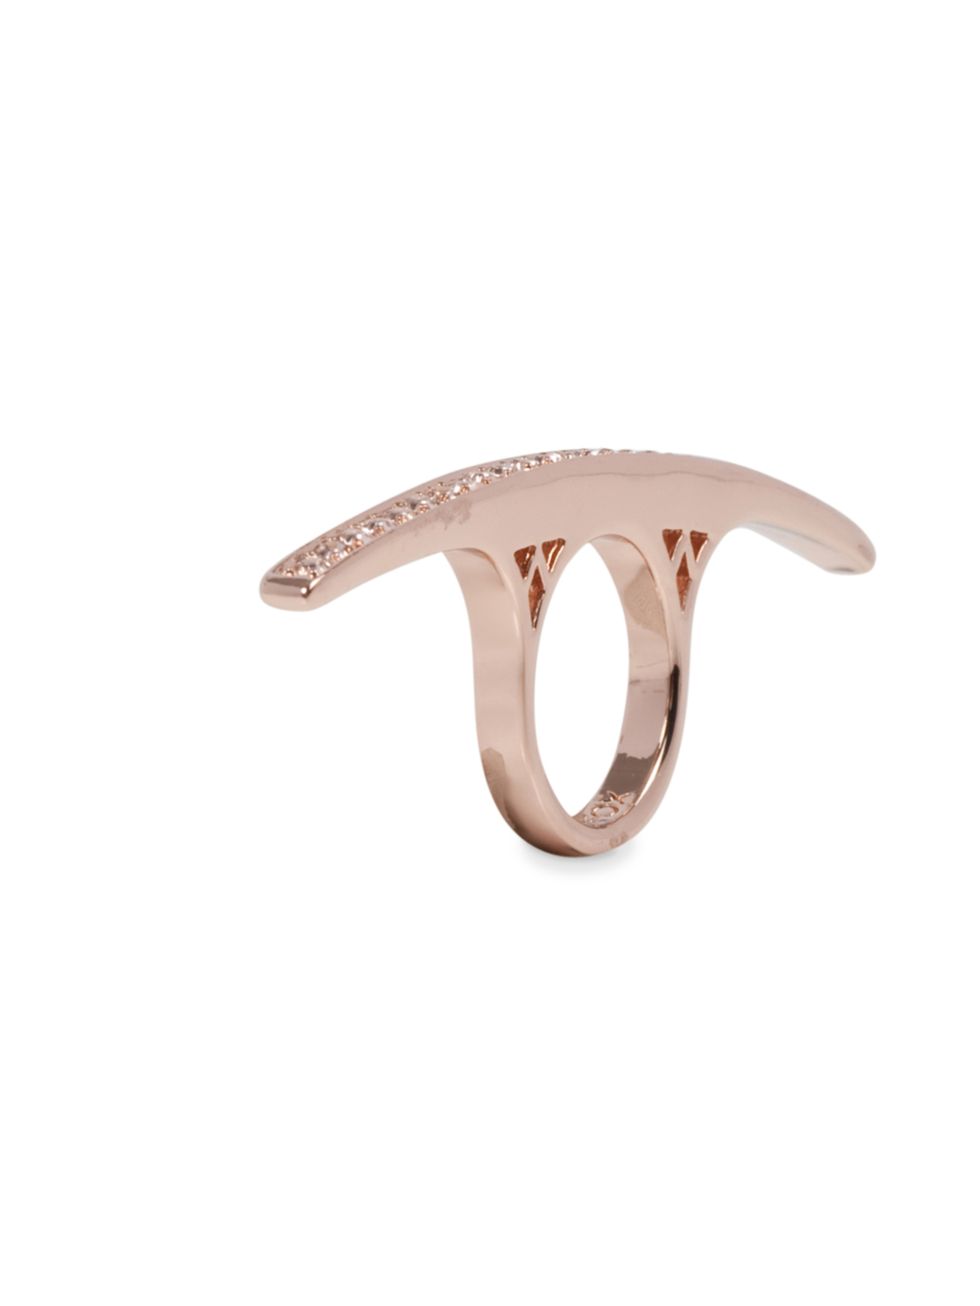 <p>An understated yet statement-inducing piece of jewellery is the perfect way to pep up your look and ready yourself for the new season Wildfox curved rose gold ring,. £55, at <a href="http://www.harveynichols.com/womens/categories-1/jewellery/rings/s42